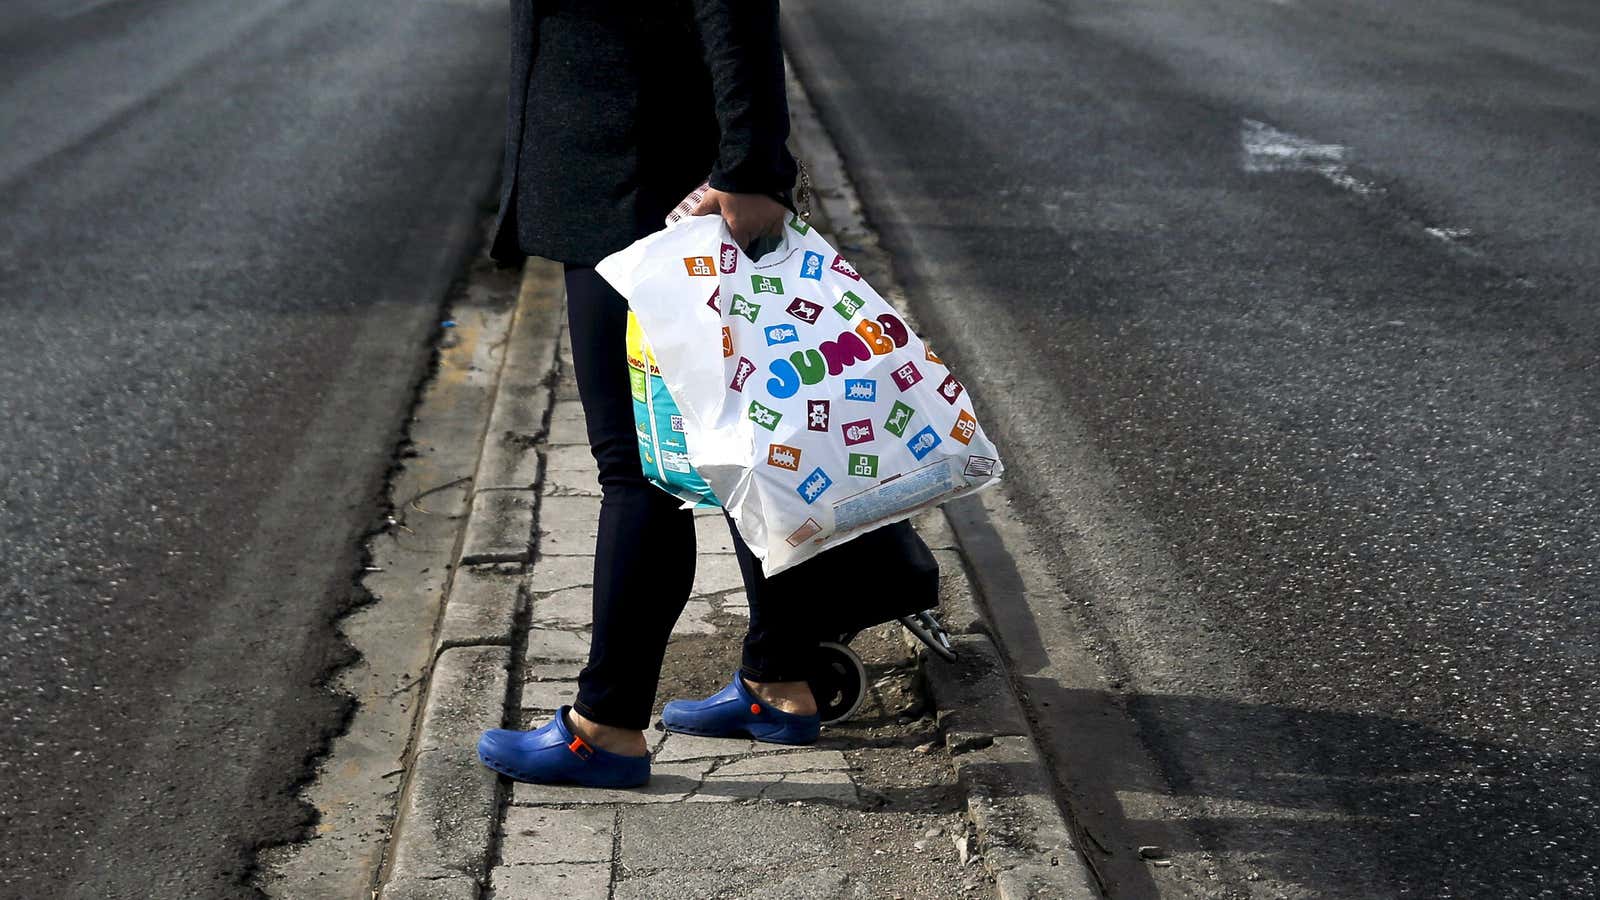 Shoppers collectively use around 500 billion single-use plastic bags every year.